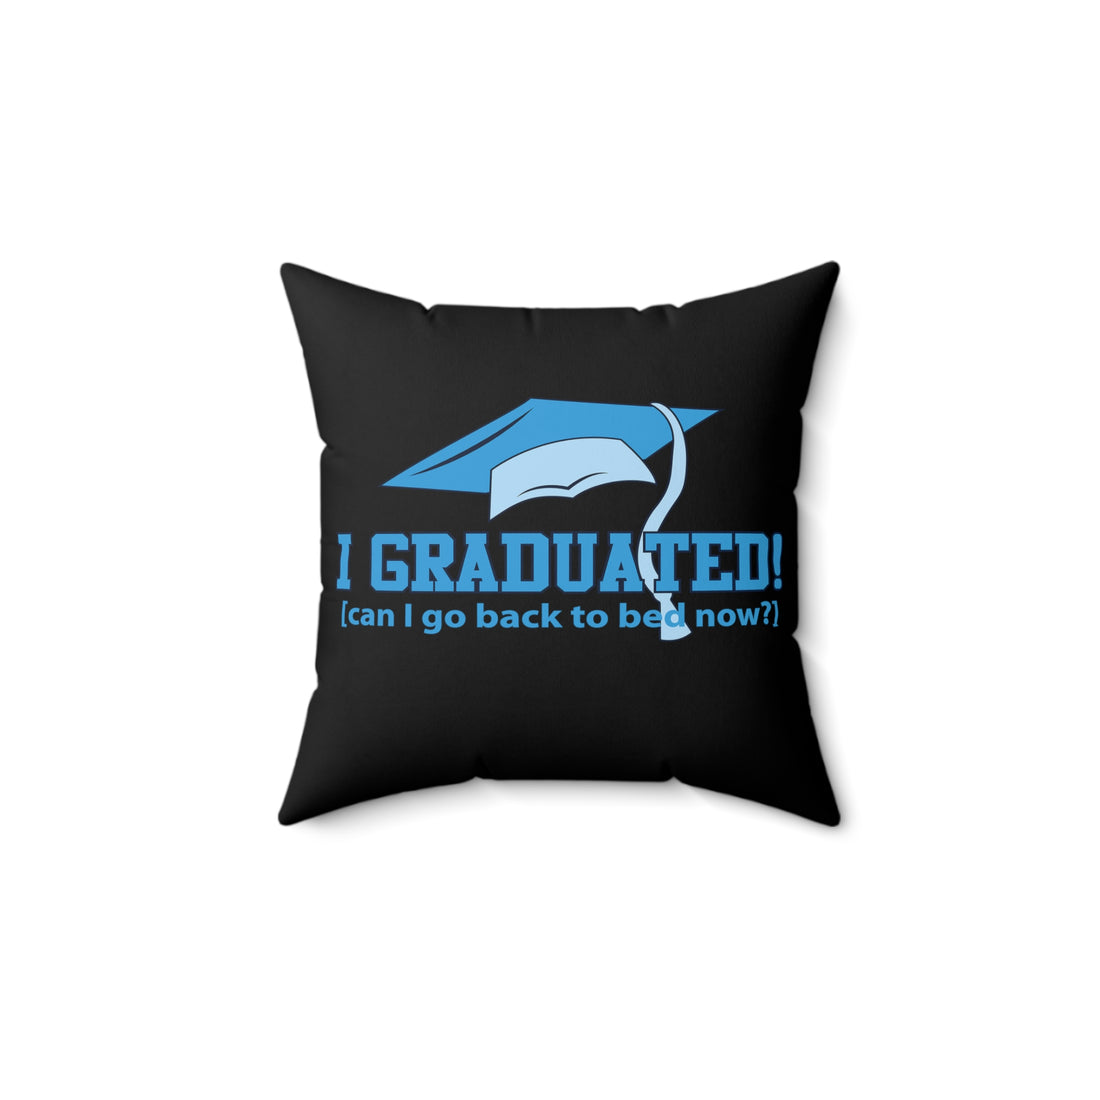 I Graduated! Can I Go Back To Bed Now - Pillow